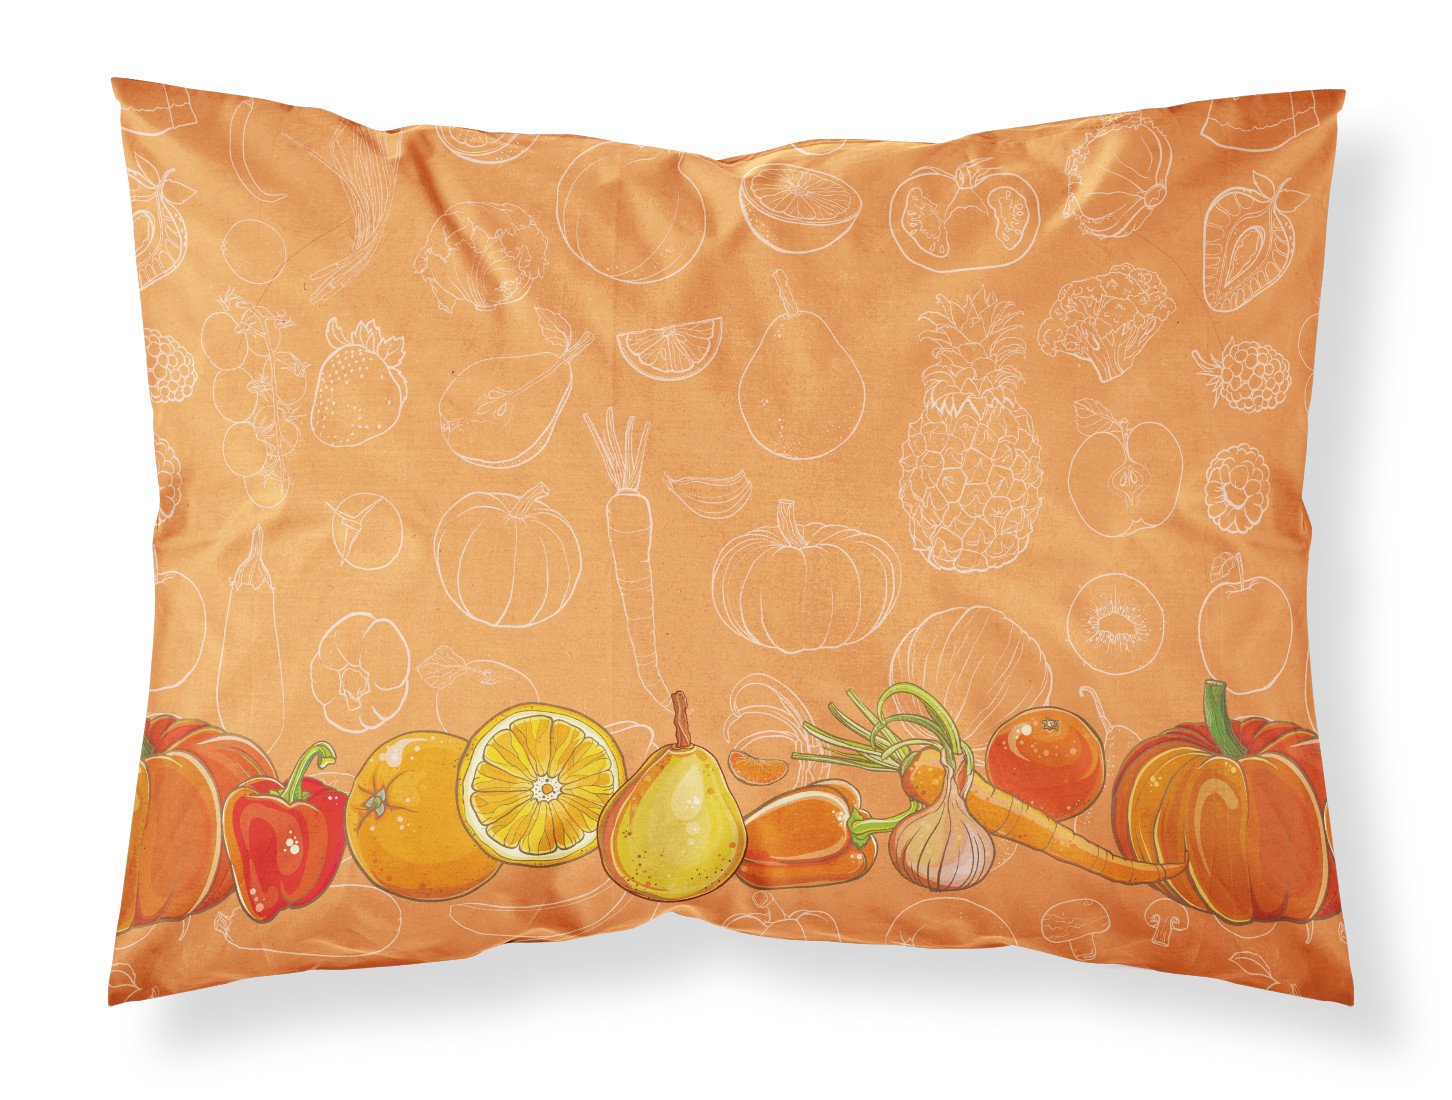 Fruits and Vegetables in Orange Fabric Standard Pillowcase BB5131PILLOWCASE by Caroline's Treasures